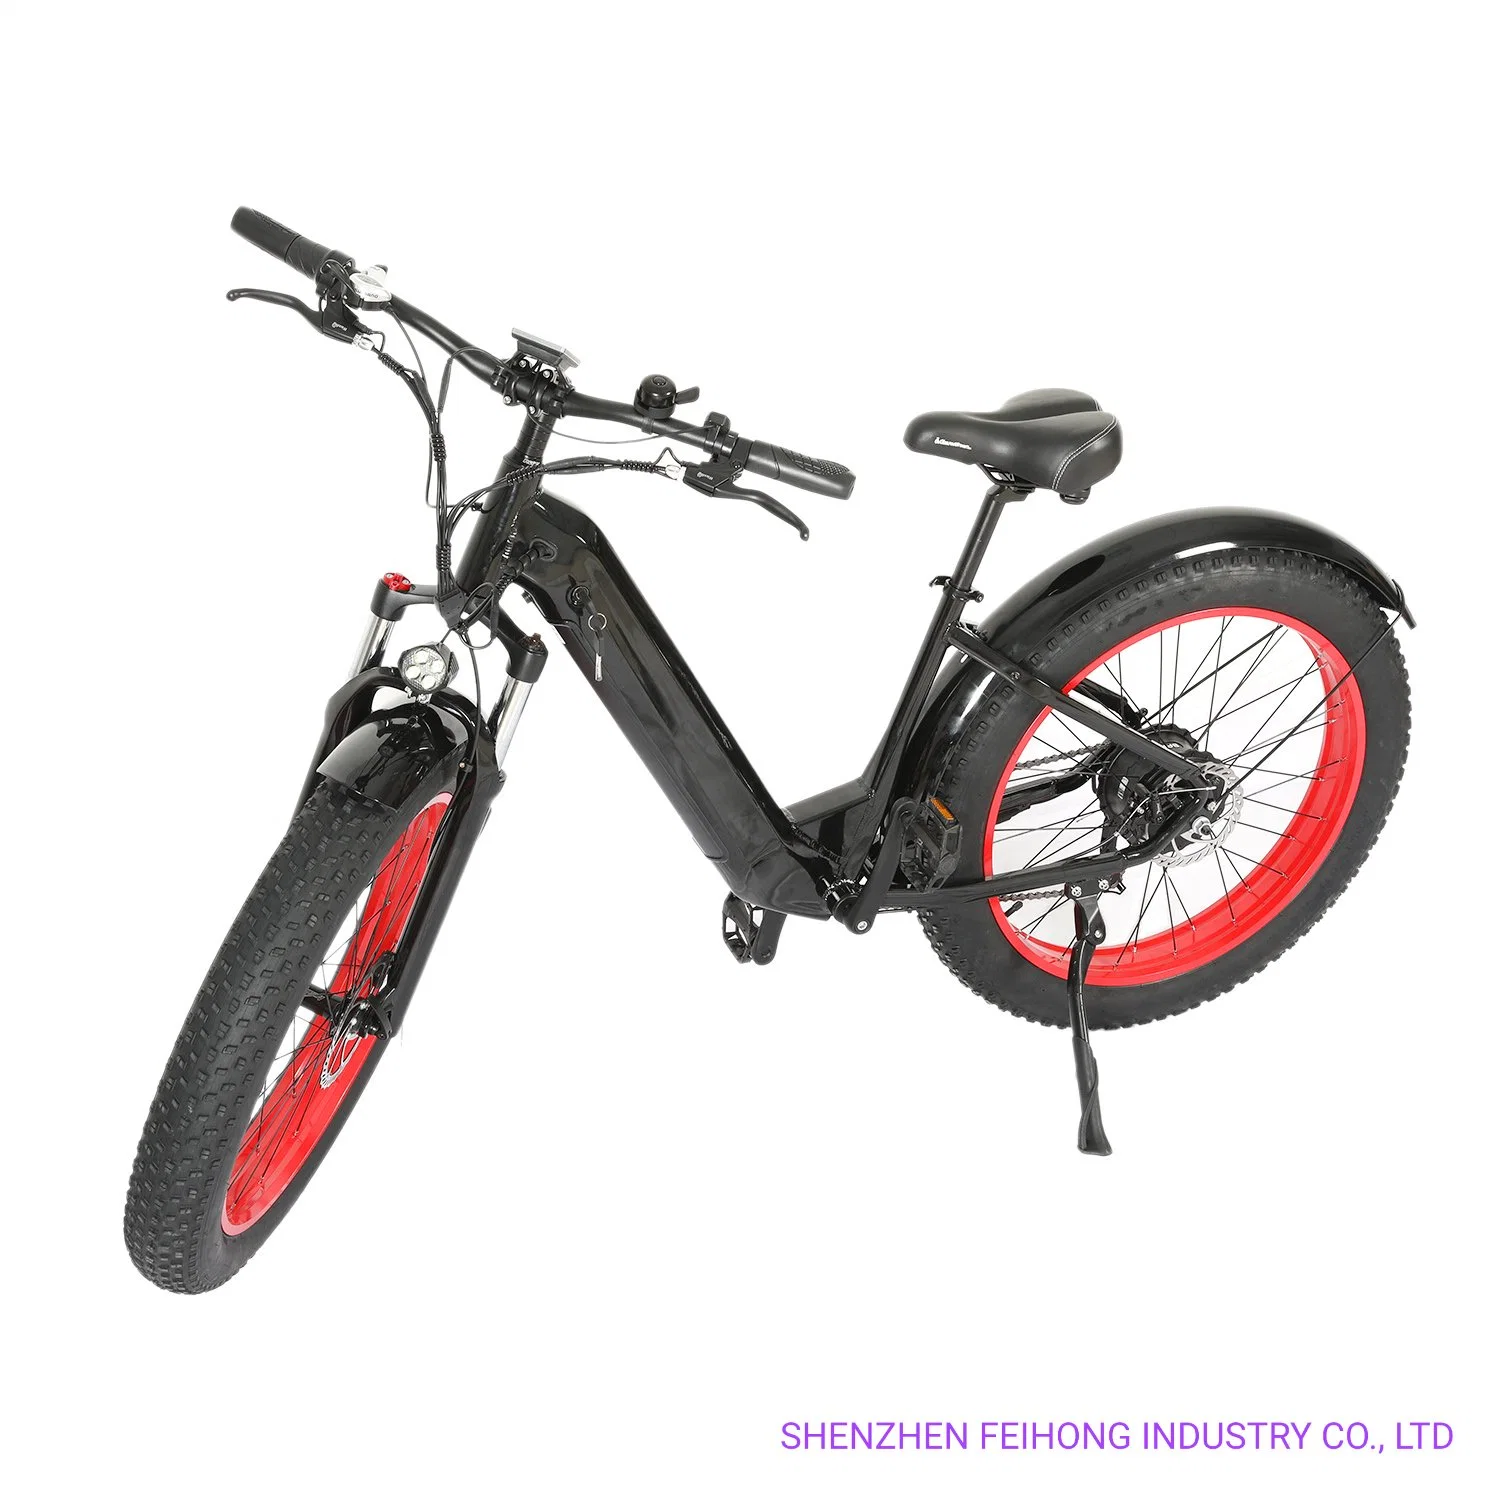 20" Motorcycle Electric Scooter Bicycle Electric Bike Electric Motorcycle Scooter Motor Scooter Electric Vehicle Mountain Bike 48V 10.4ah Battery Lithium